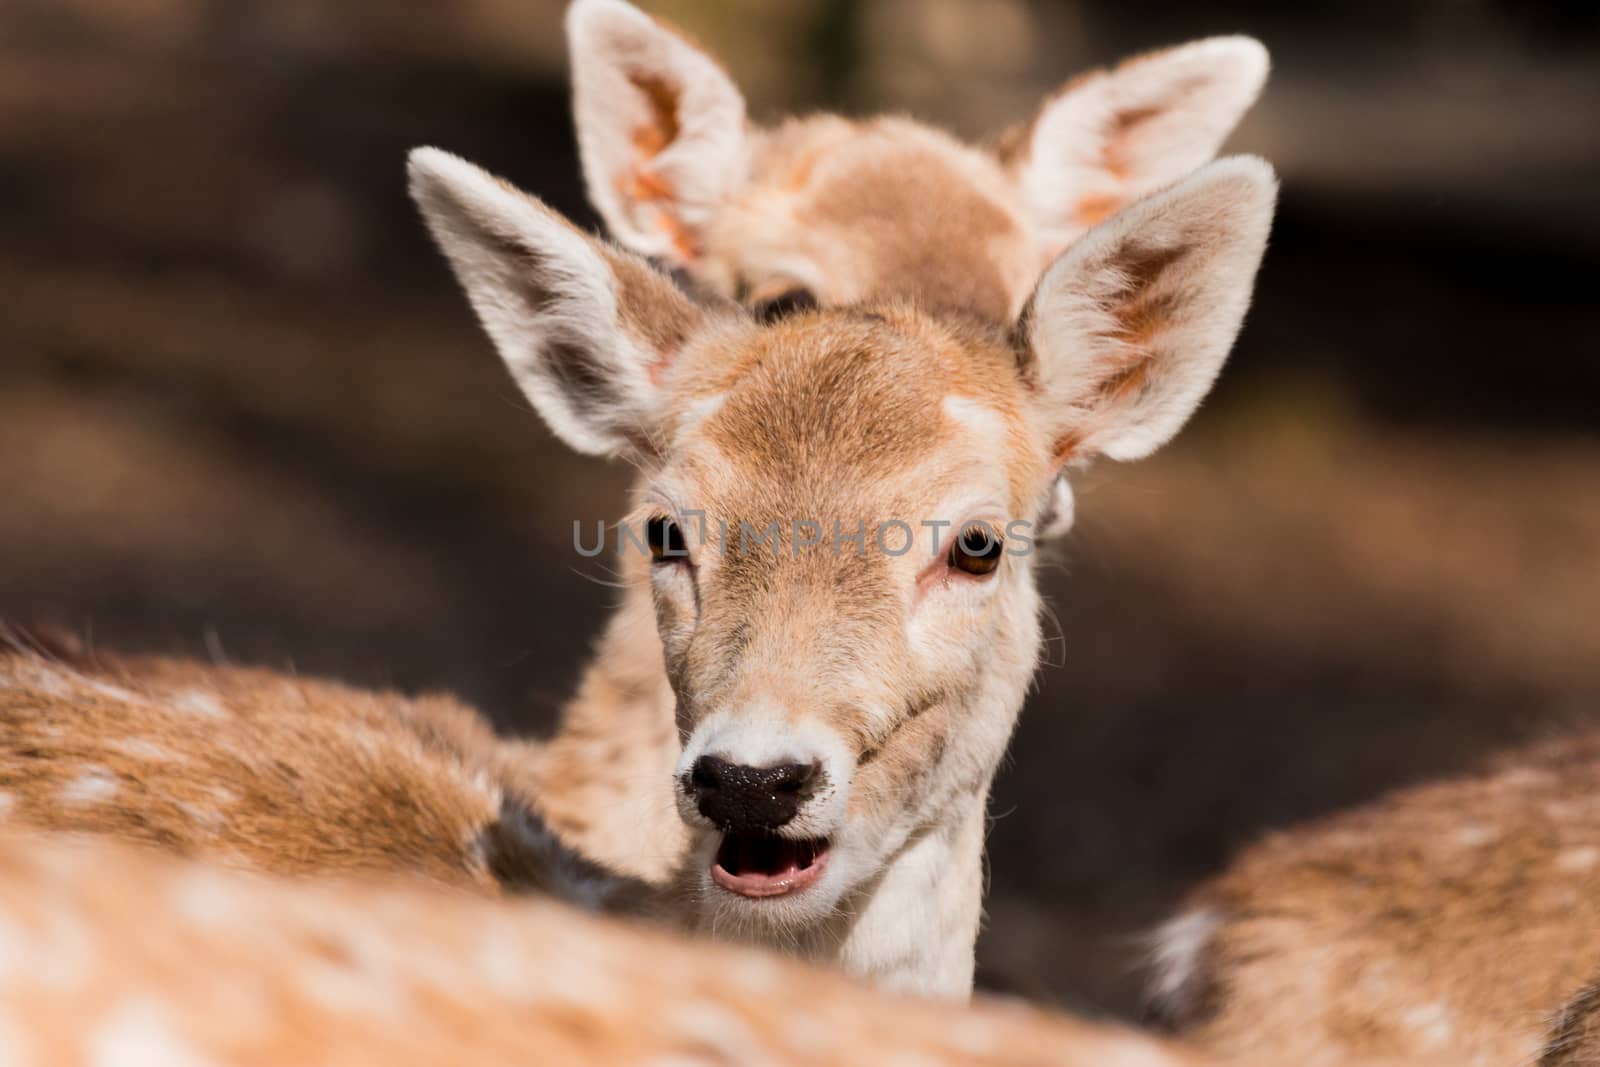 A little Fawn looking at the camera in the middle of the forest